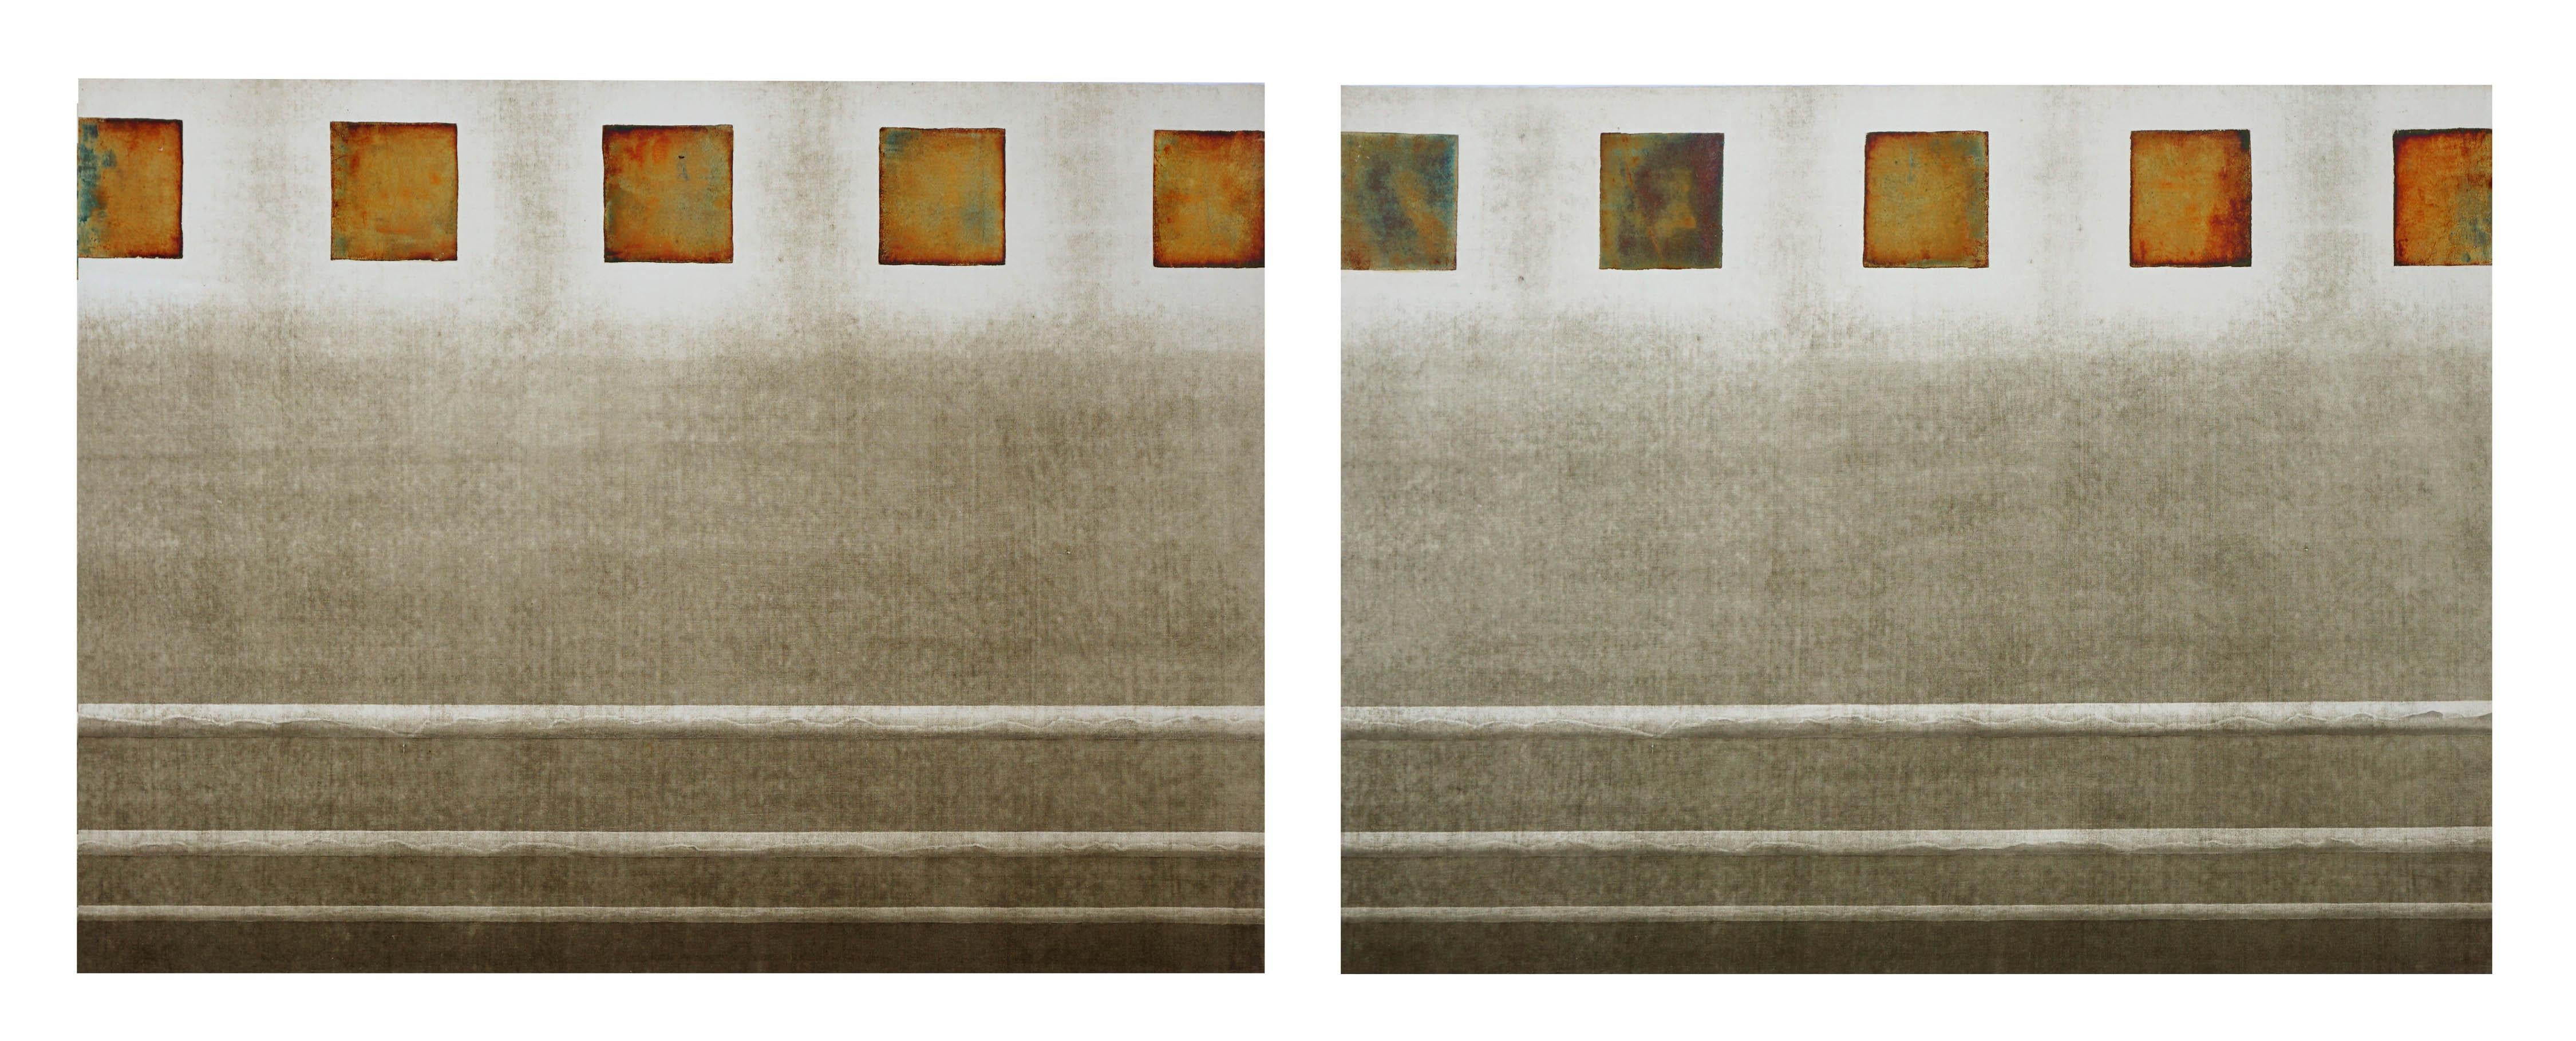 Unusual and stunning collotype diptych (2 panels) abstract composition of subtle bronze gilding blocks by Patricia A. Pearce (American, b. 1948). Diptych can be installed horizontal and vertically. Unsigned. Purchased as part of artist's collection.